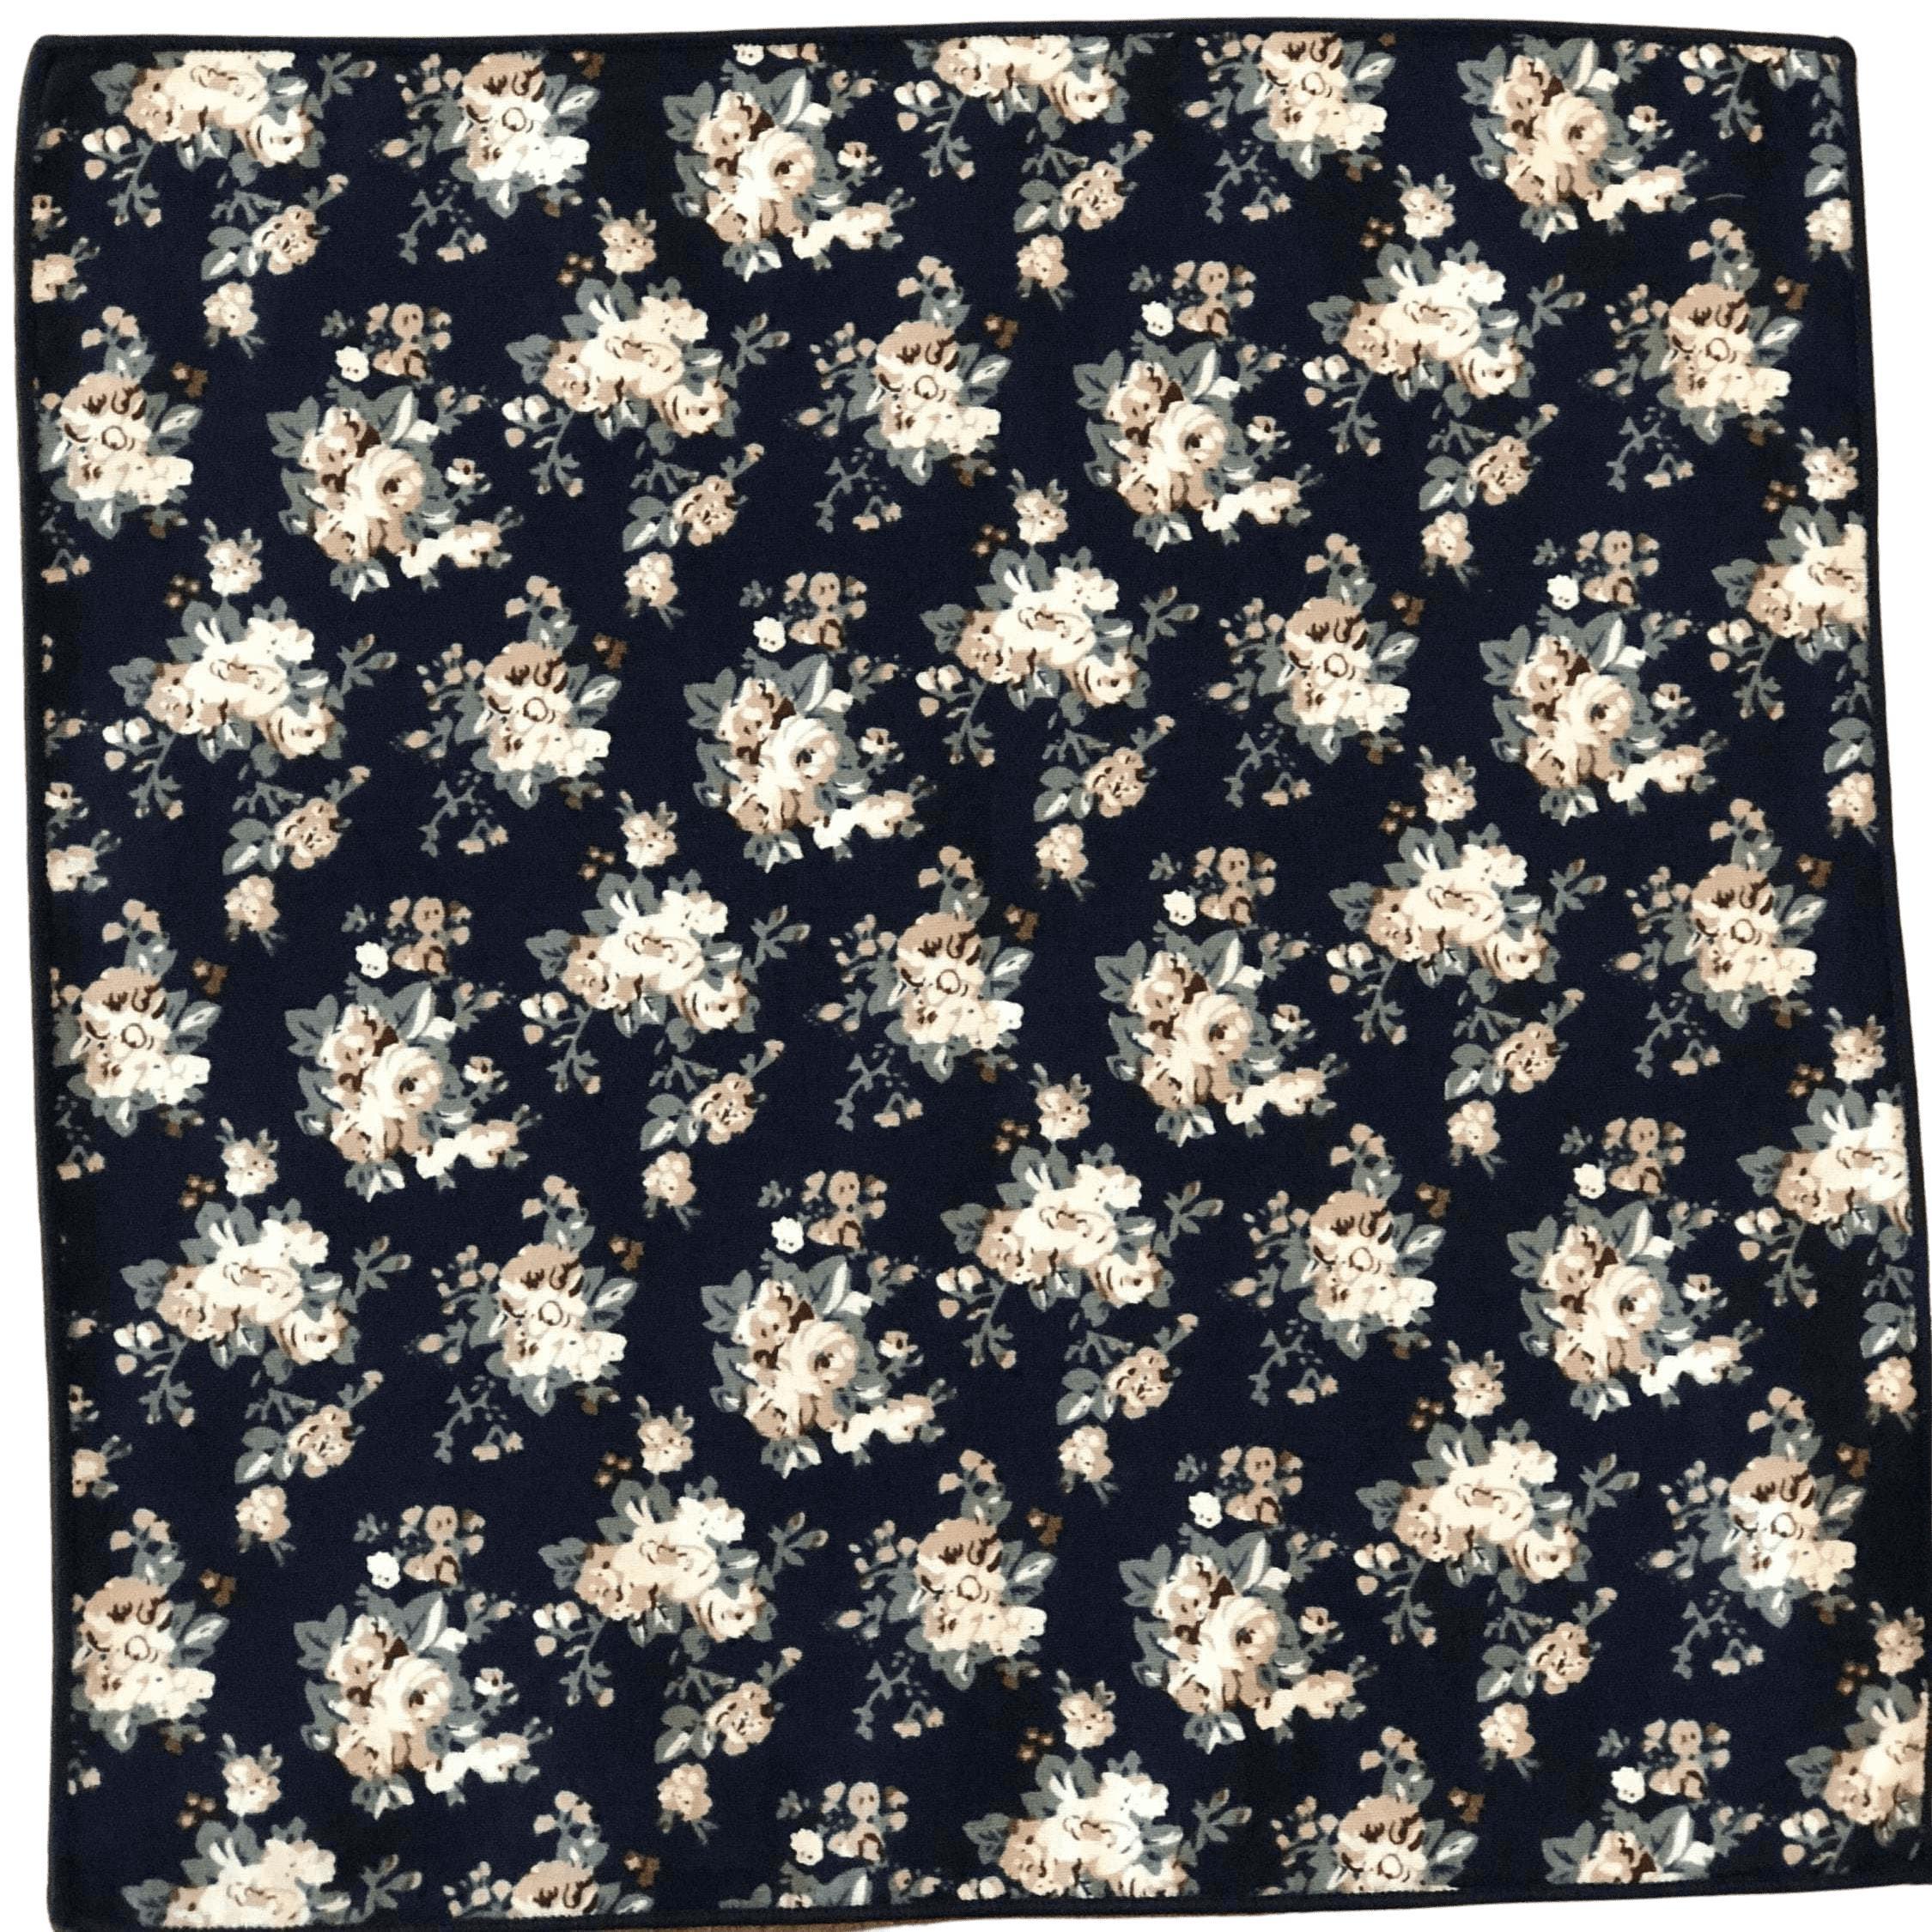 Navy Floral Pocket Square FINLEY - MYTIESHOP | Blue Floral print pocket square Mytieshop Navy Floral Pocket Square Material CottonItem Length: 23 cm ( 9 inches)Item Width : 22 cm (8.6 inches) Base Color: Navy Great for: Groom Groomsmen Wedding Shoots Formal Prom Fancy Parties Gifts and presents